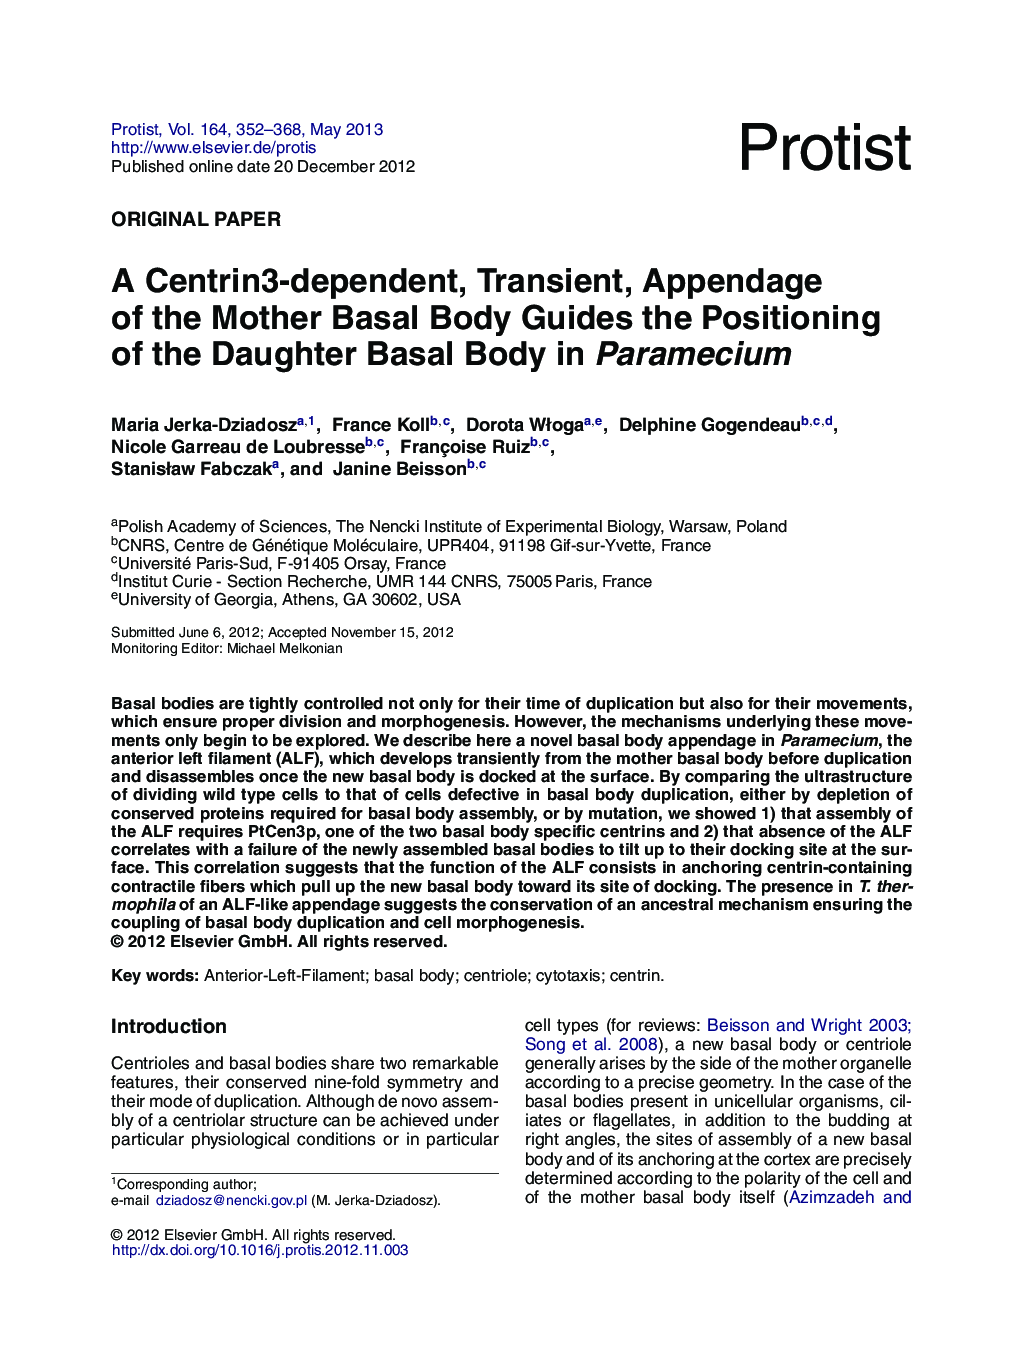 A Centrin3-dependent, Transient, Appendage of the Mother Basal Body Guides the Positioning of the Daughter Basal Body in Paramecium